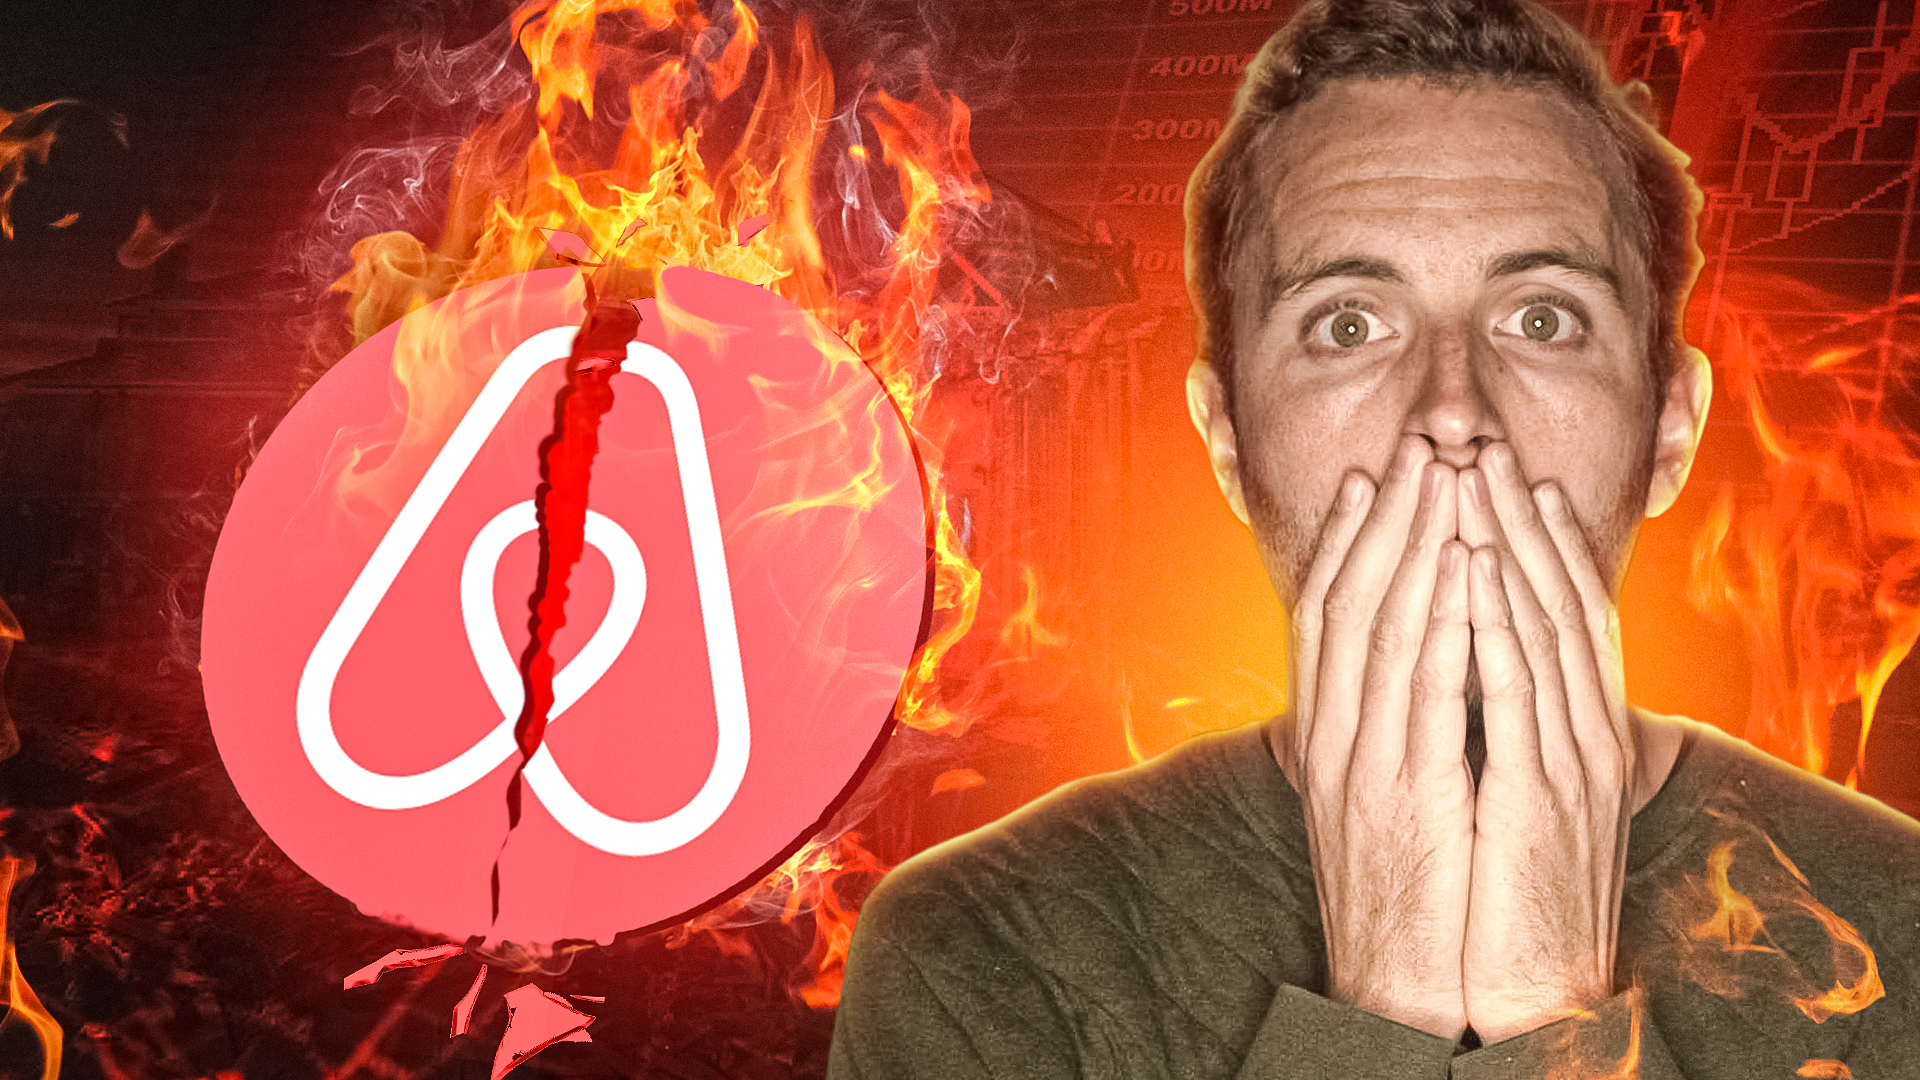 Airbnbust will destroy airbnb hosts and investors